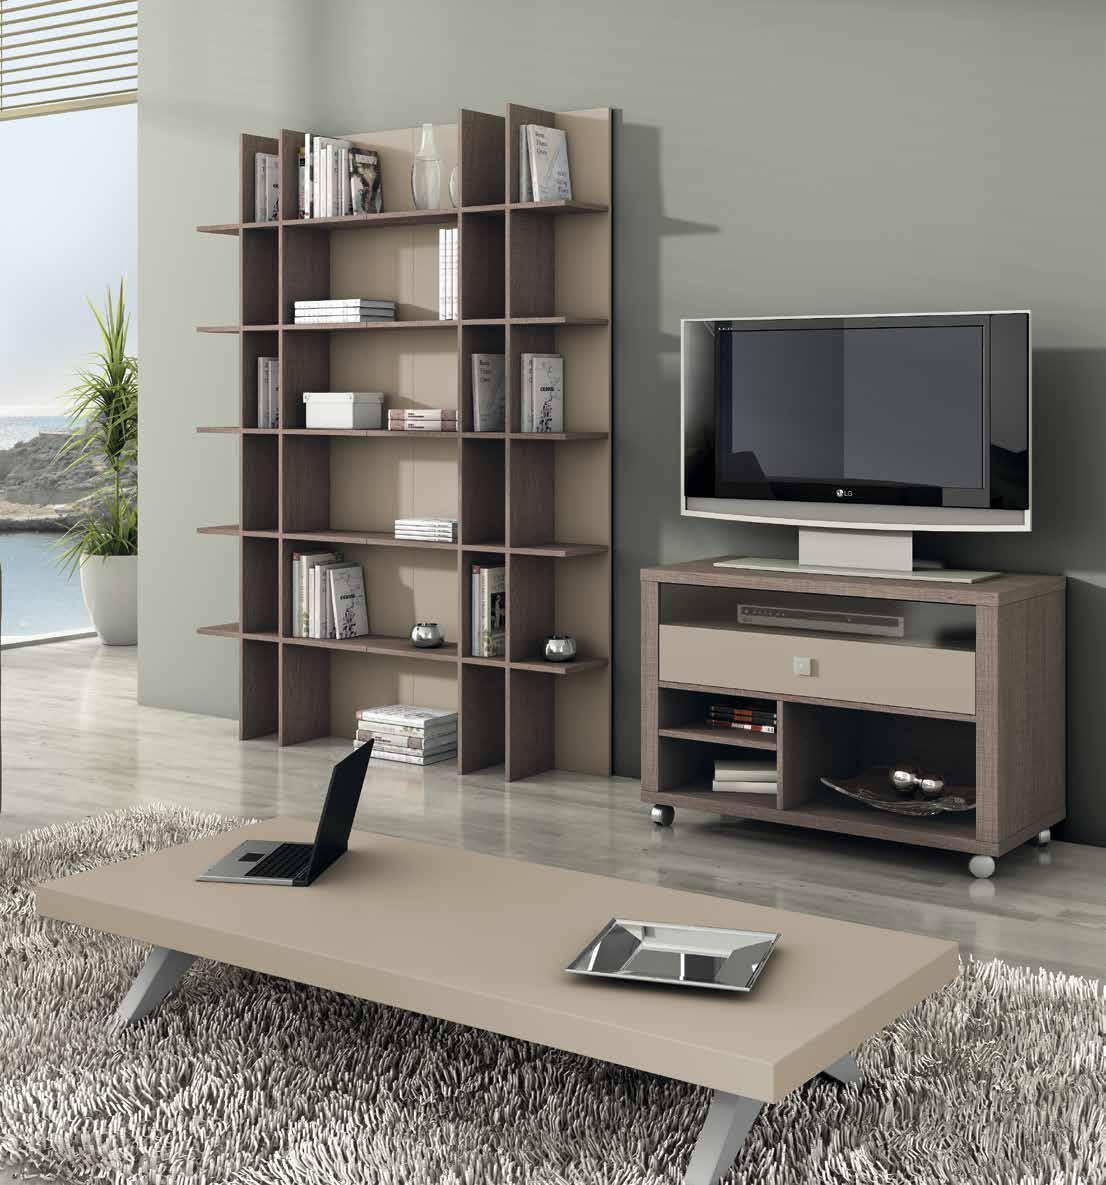 Images Muebles San Benito